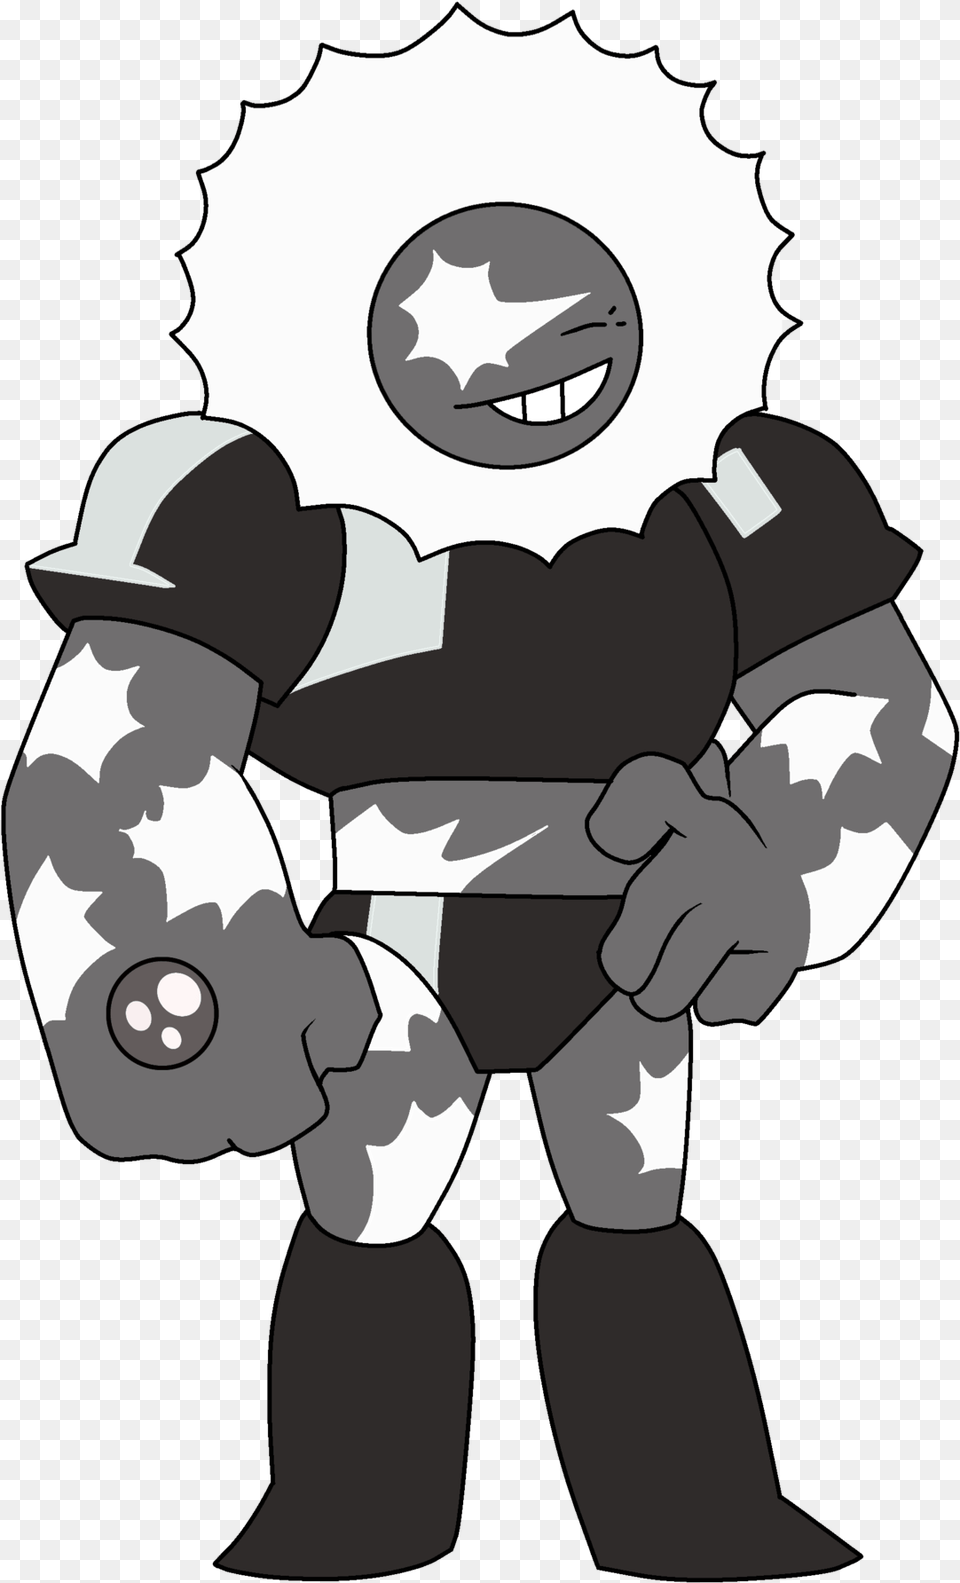 Snowflake Made A Snowflake Obsidian Based On The Snowflake Obsidian Steven Universe, Baby, Person, Stencil Free Transparent Png